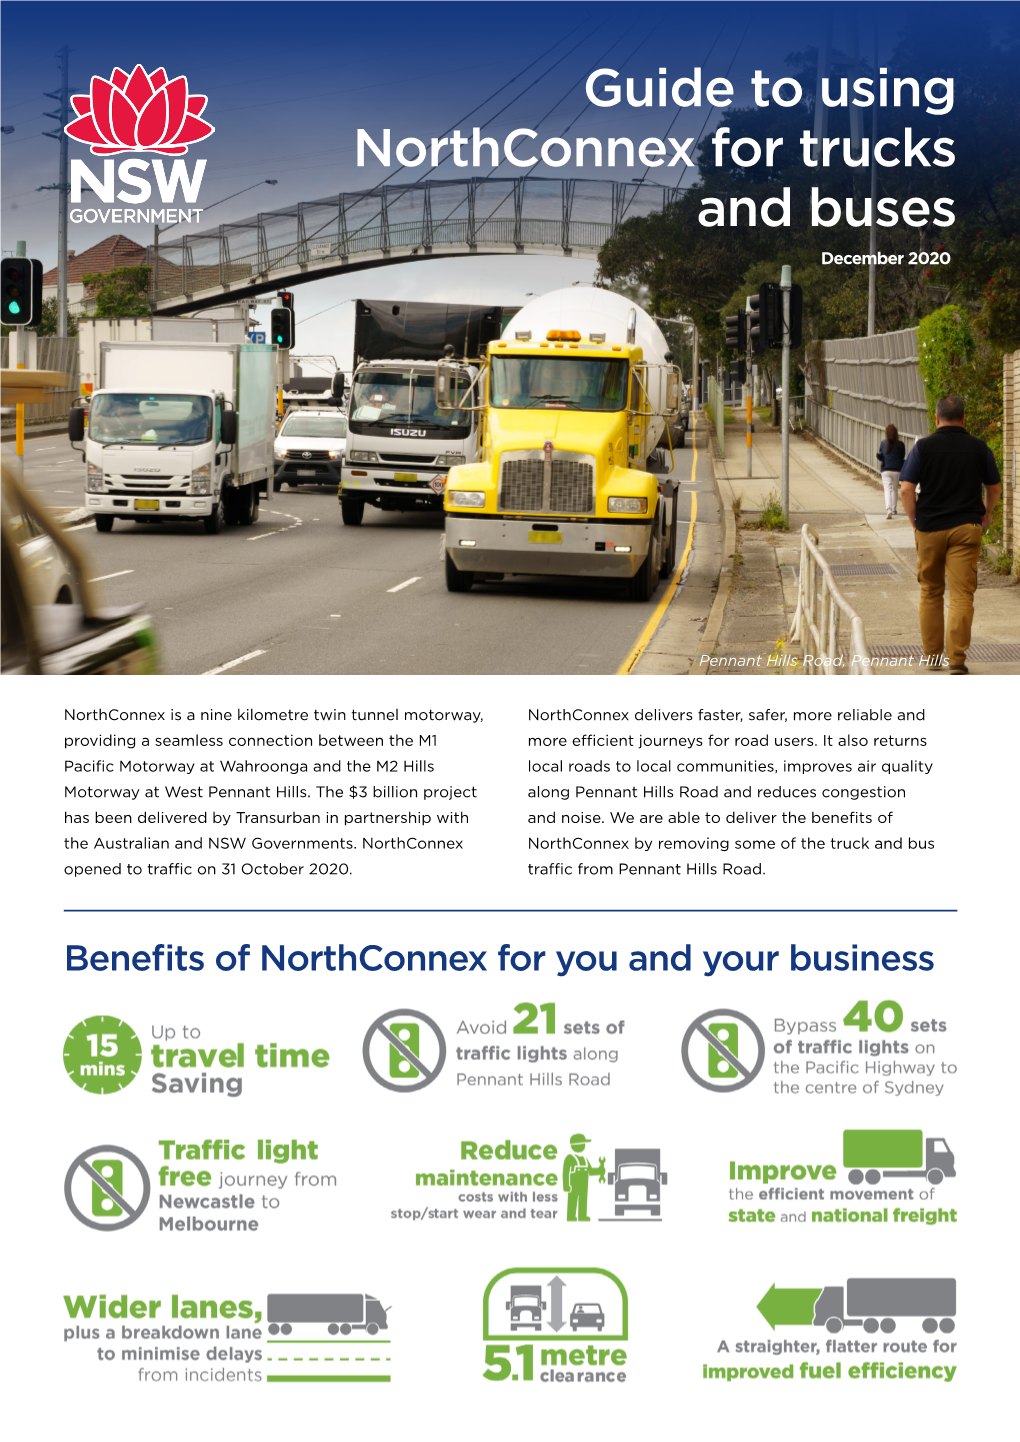 Guide to Using Northconnex for Trucks and Buses December 2020